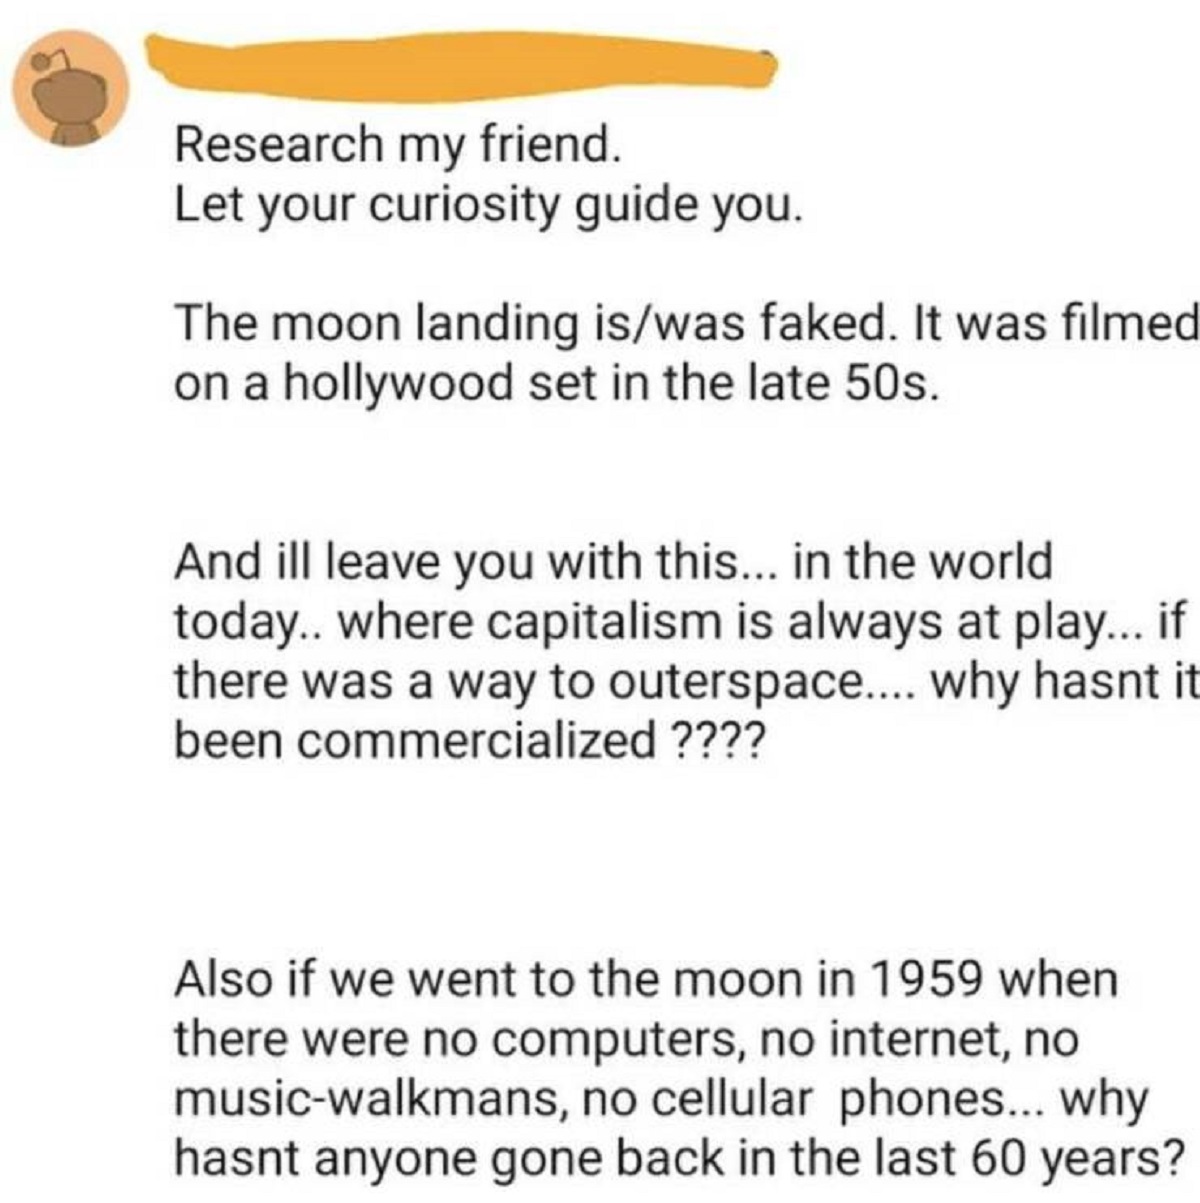 document - Research my friend. Let your curiosity guide you. The moon landing iswas faked. It was filmed on a hollywood set in the late 50s. And ill leave you with this... in the world today.. where capitalism is always at play... if there was a way to ou